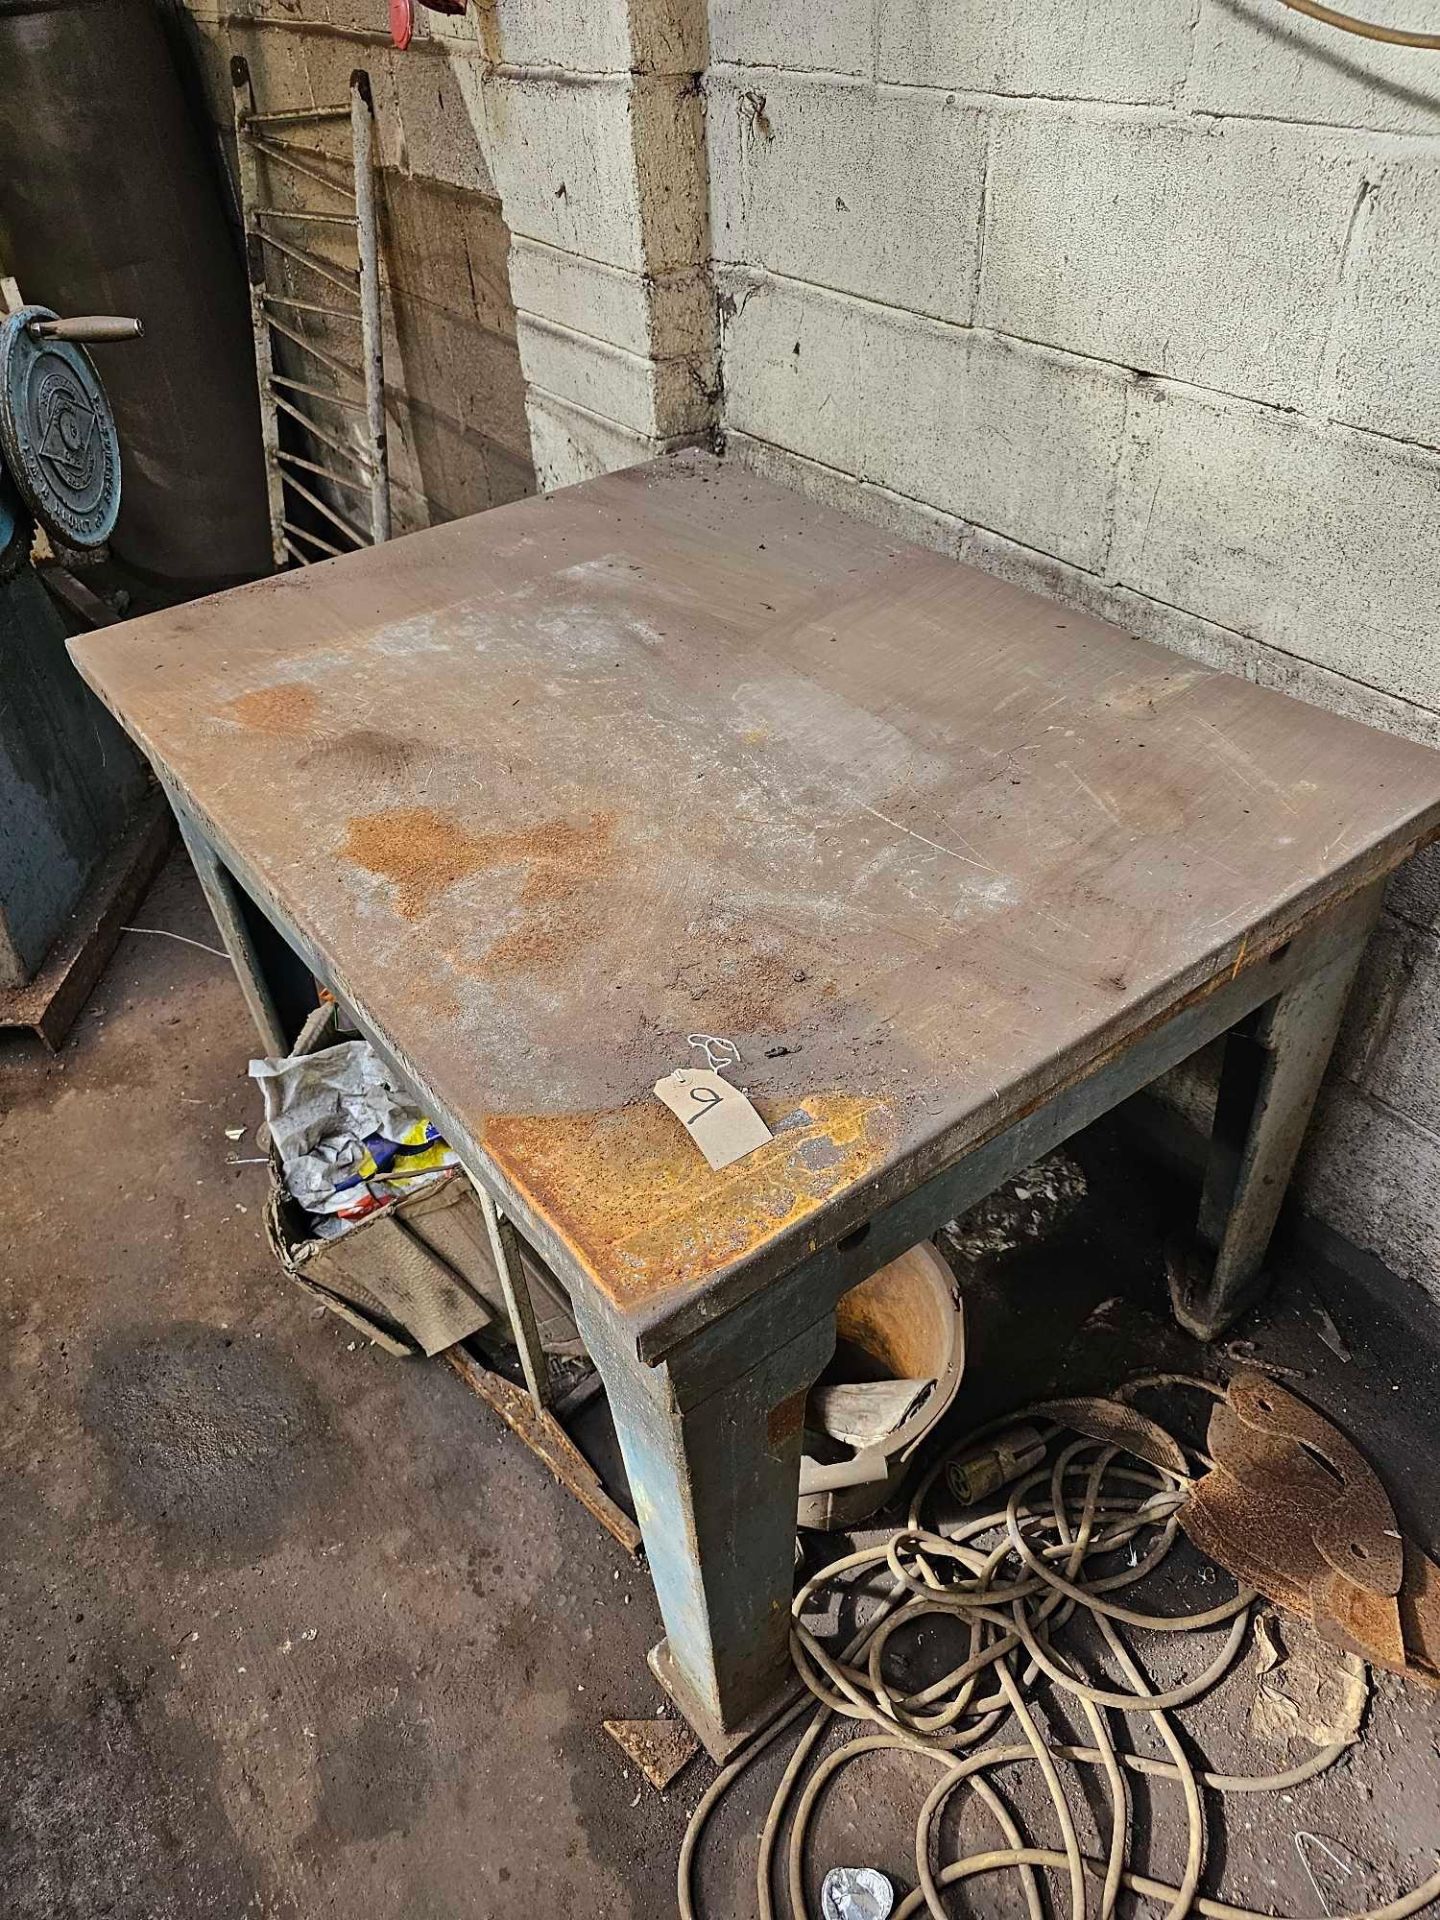 Cast Steel Engineers Static Mark Up Table 123 x 92 x 79cm - Image 2 of 4